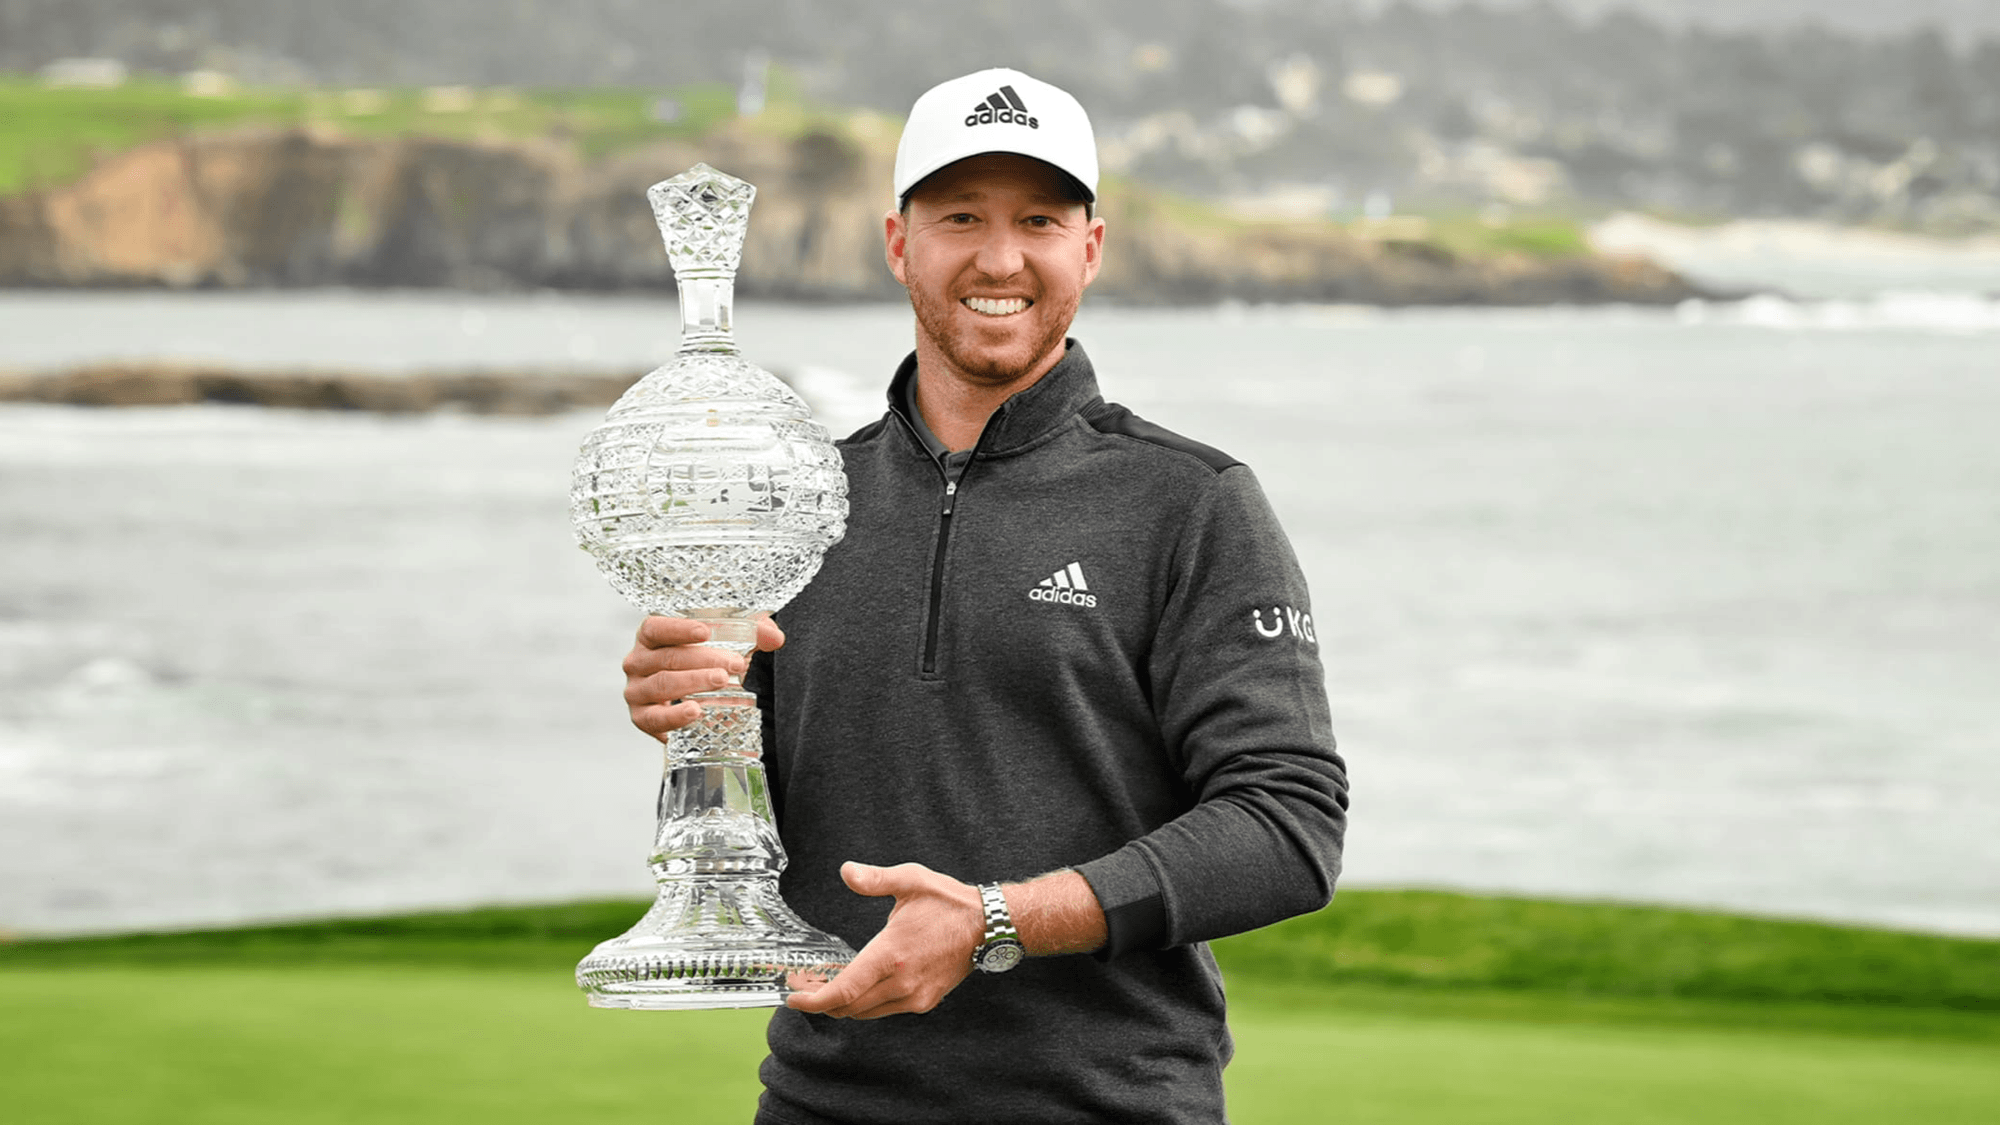 2021 Honda Classic Betting Guide: Berger Favored to Win Tournament